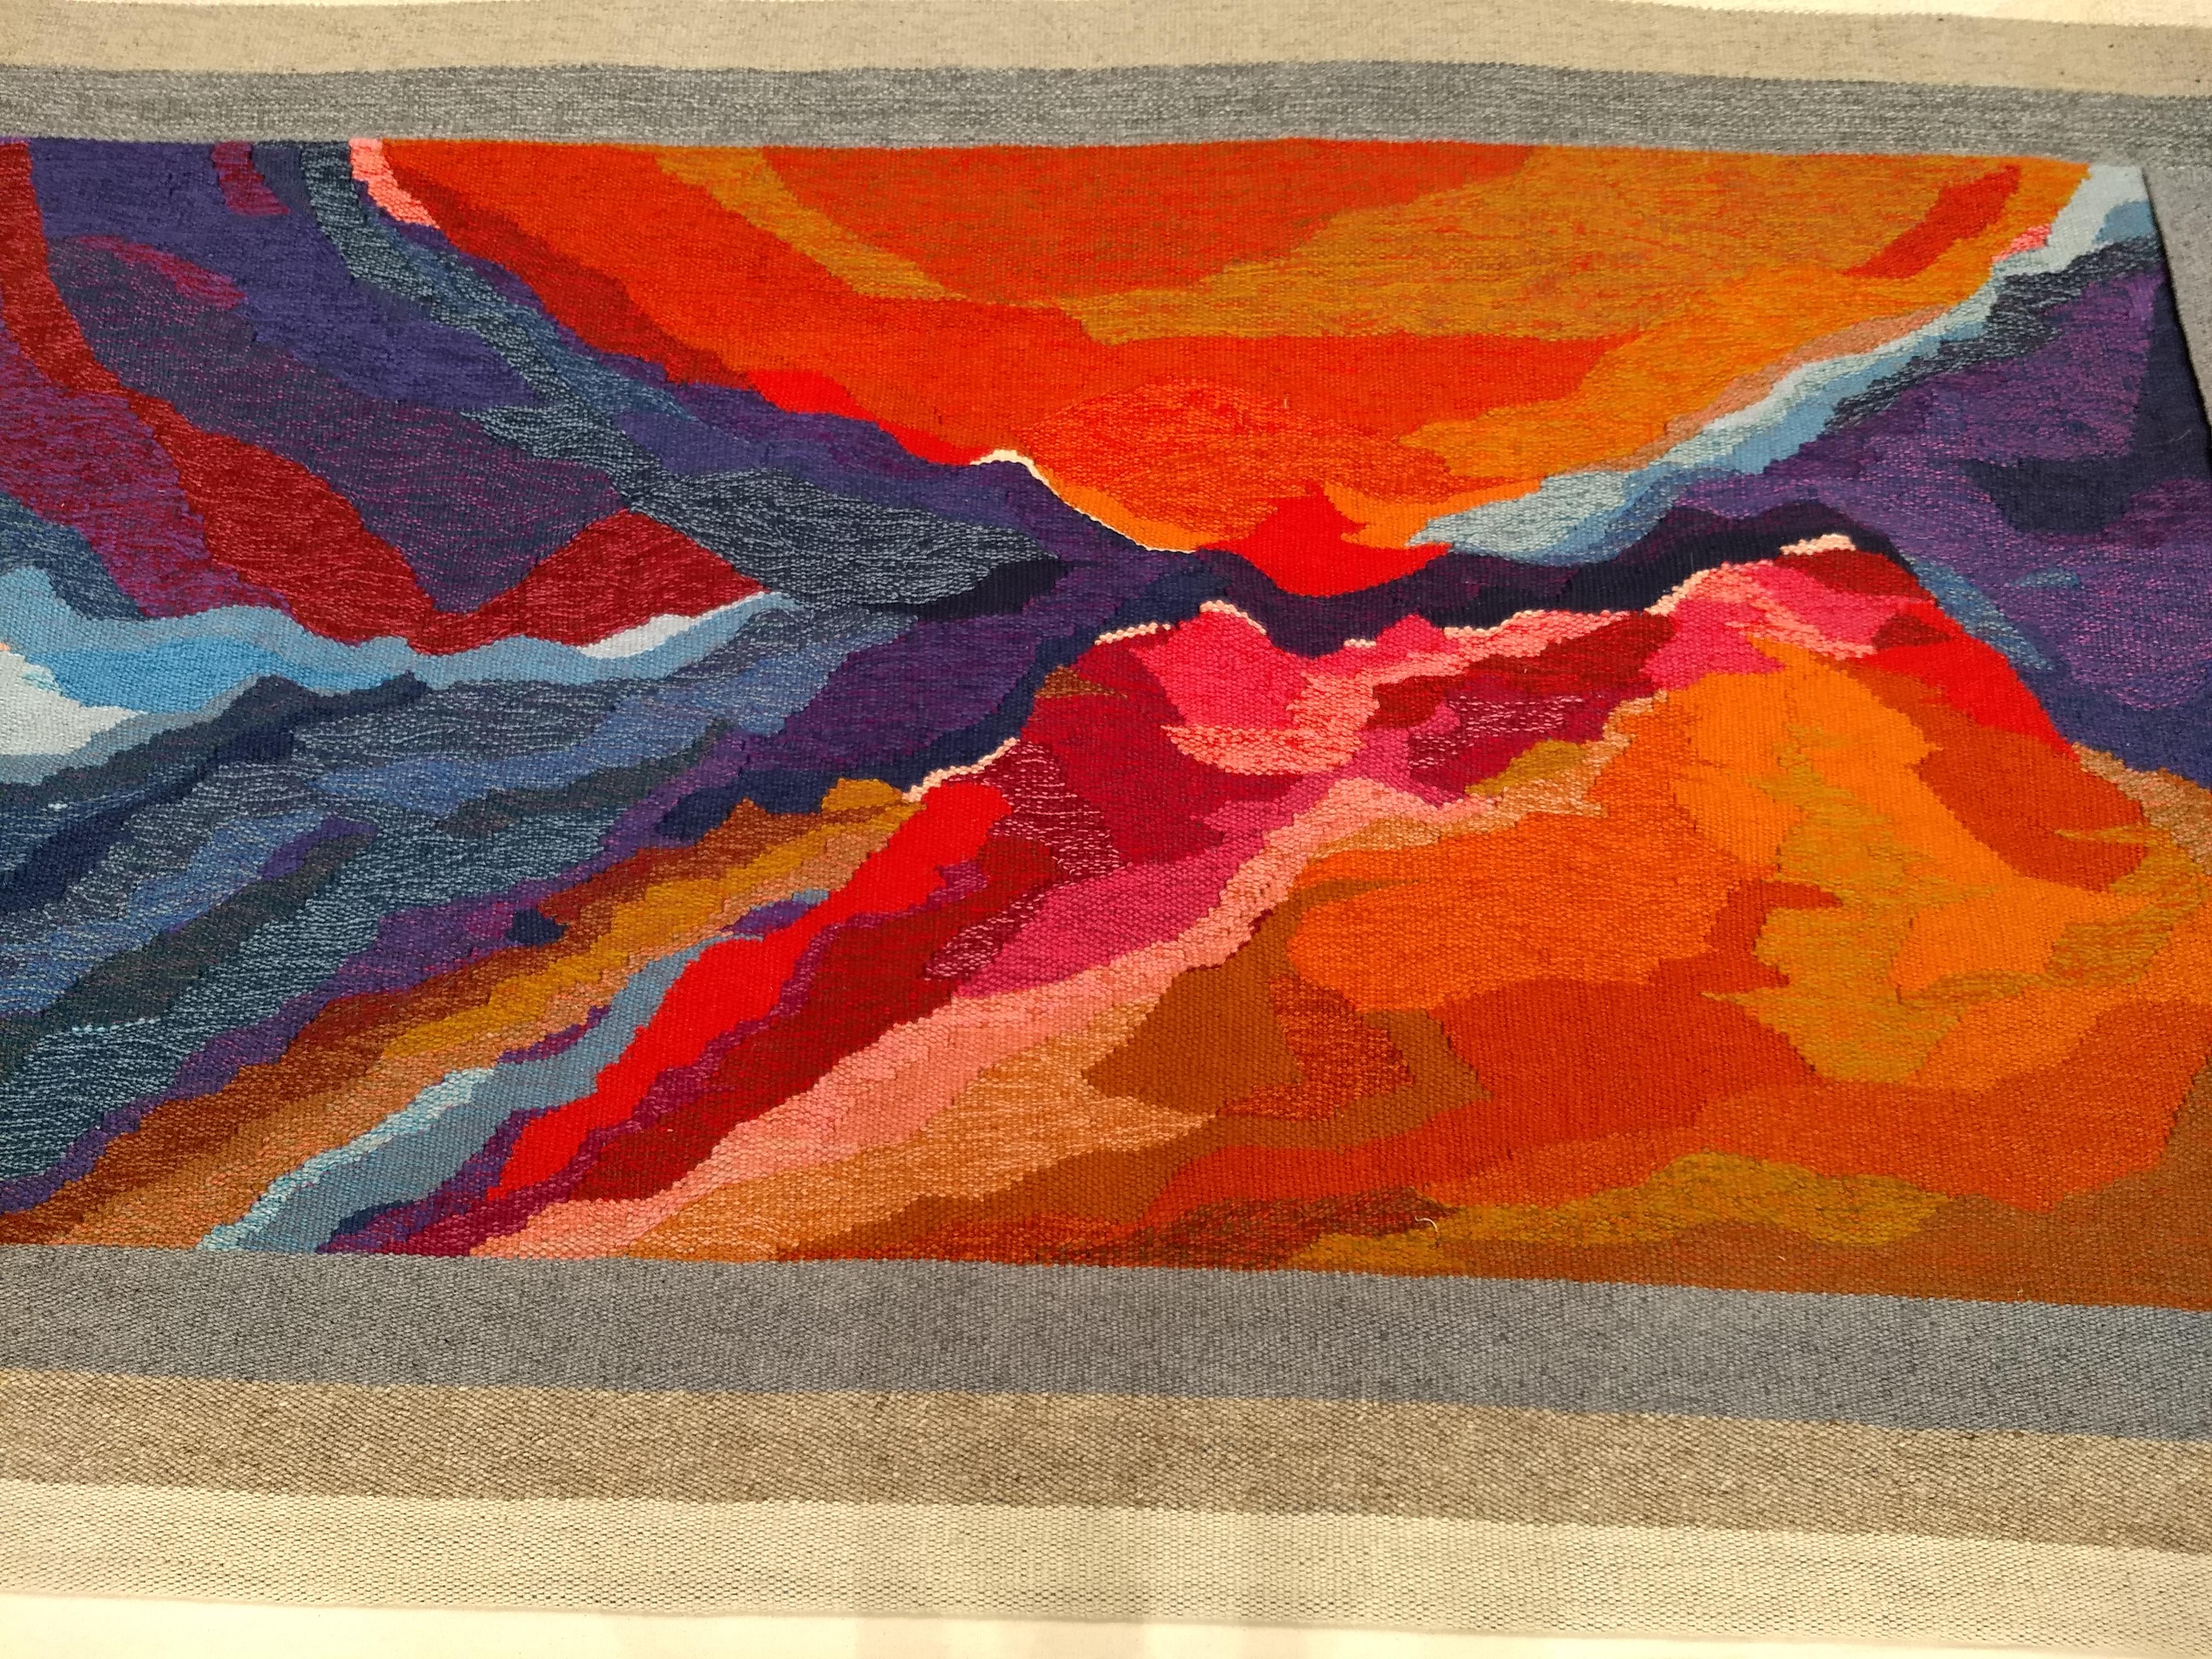 20th Century Vintage Tapestry Capturing the Sunset Colors in the American Southwest Landscape For Sale